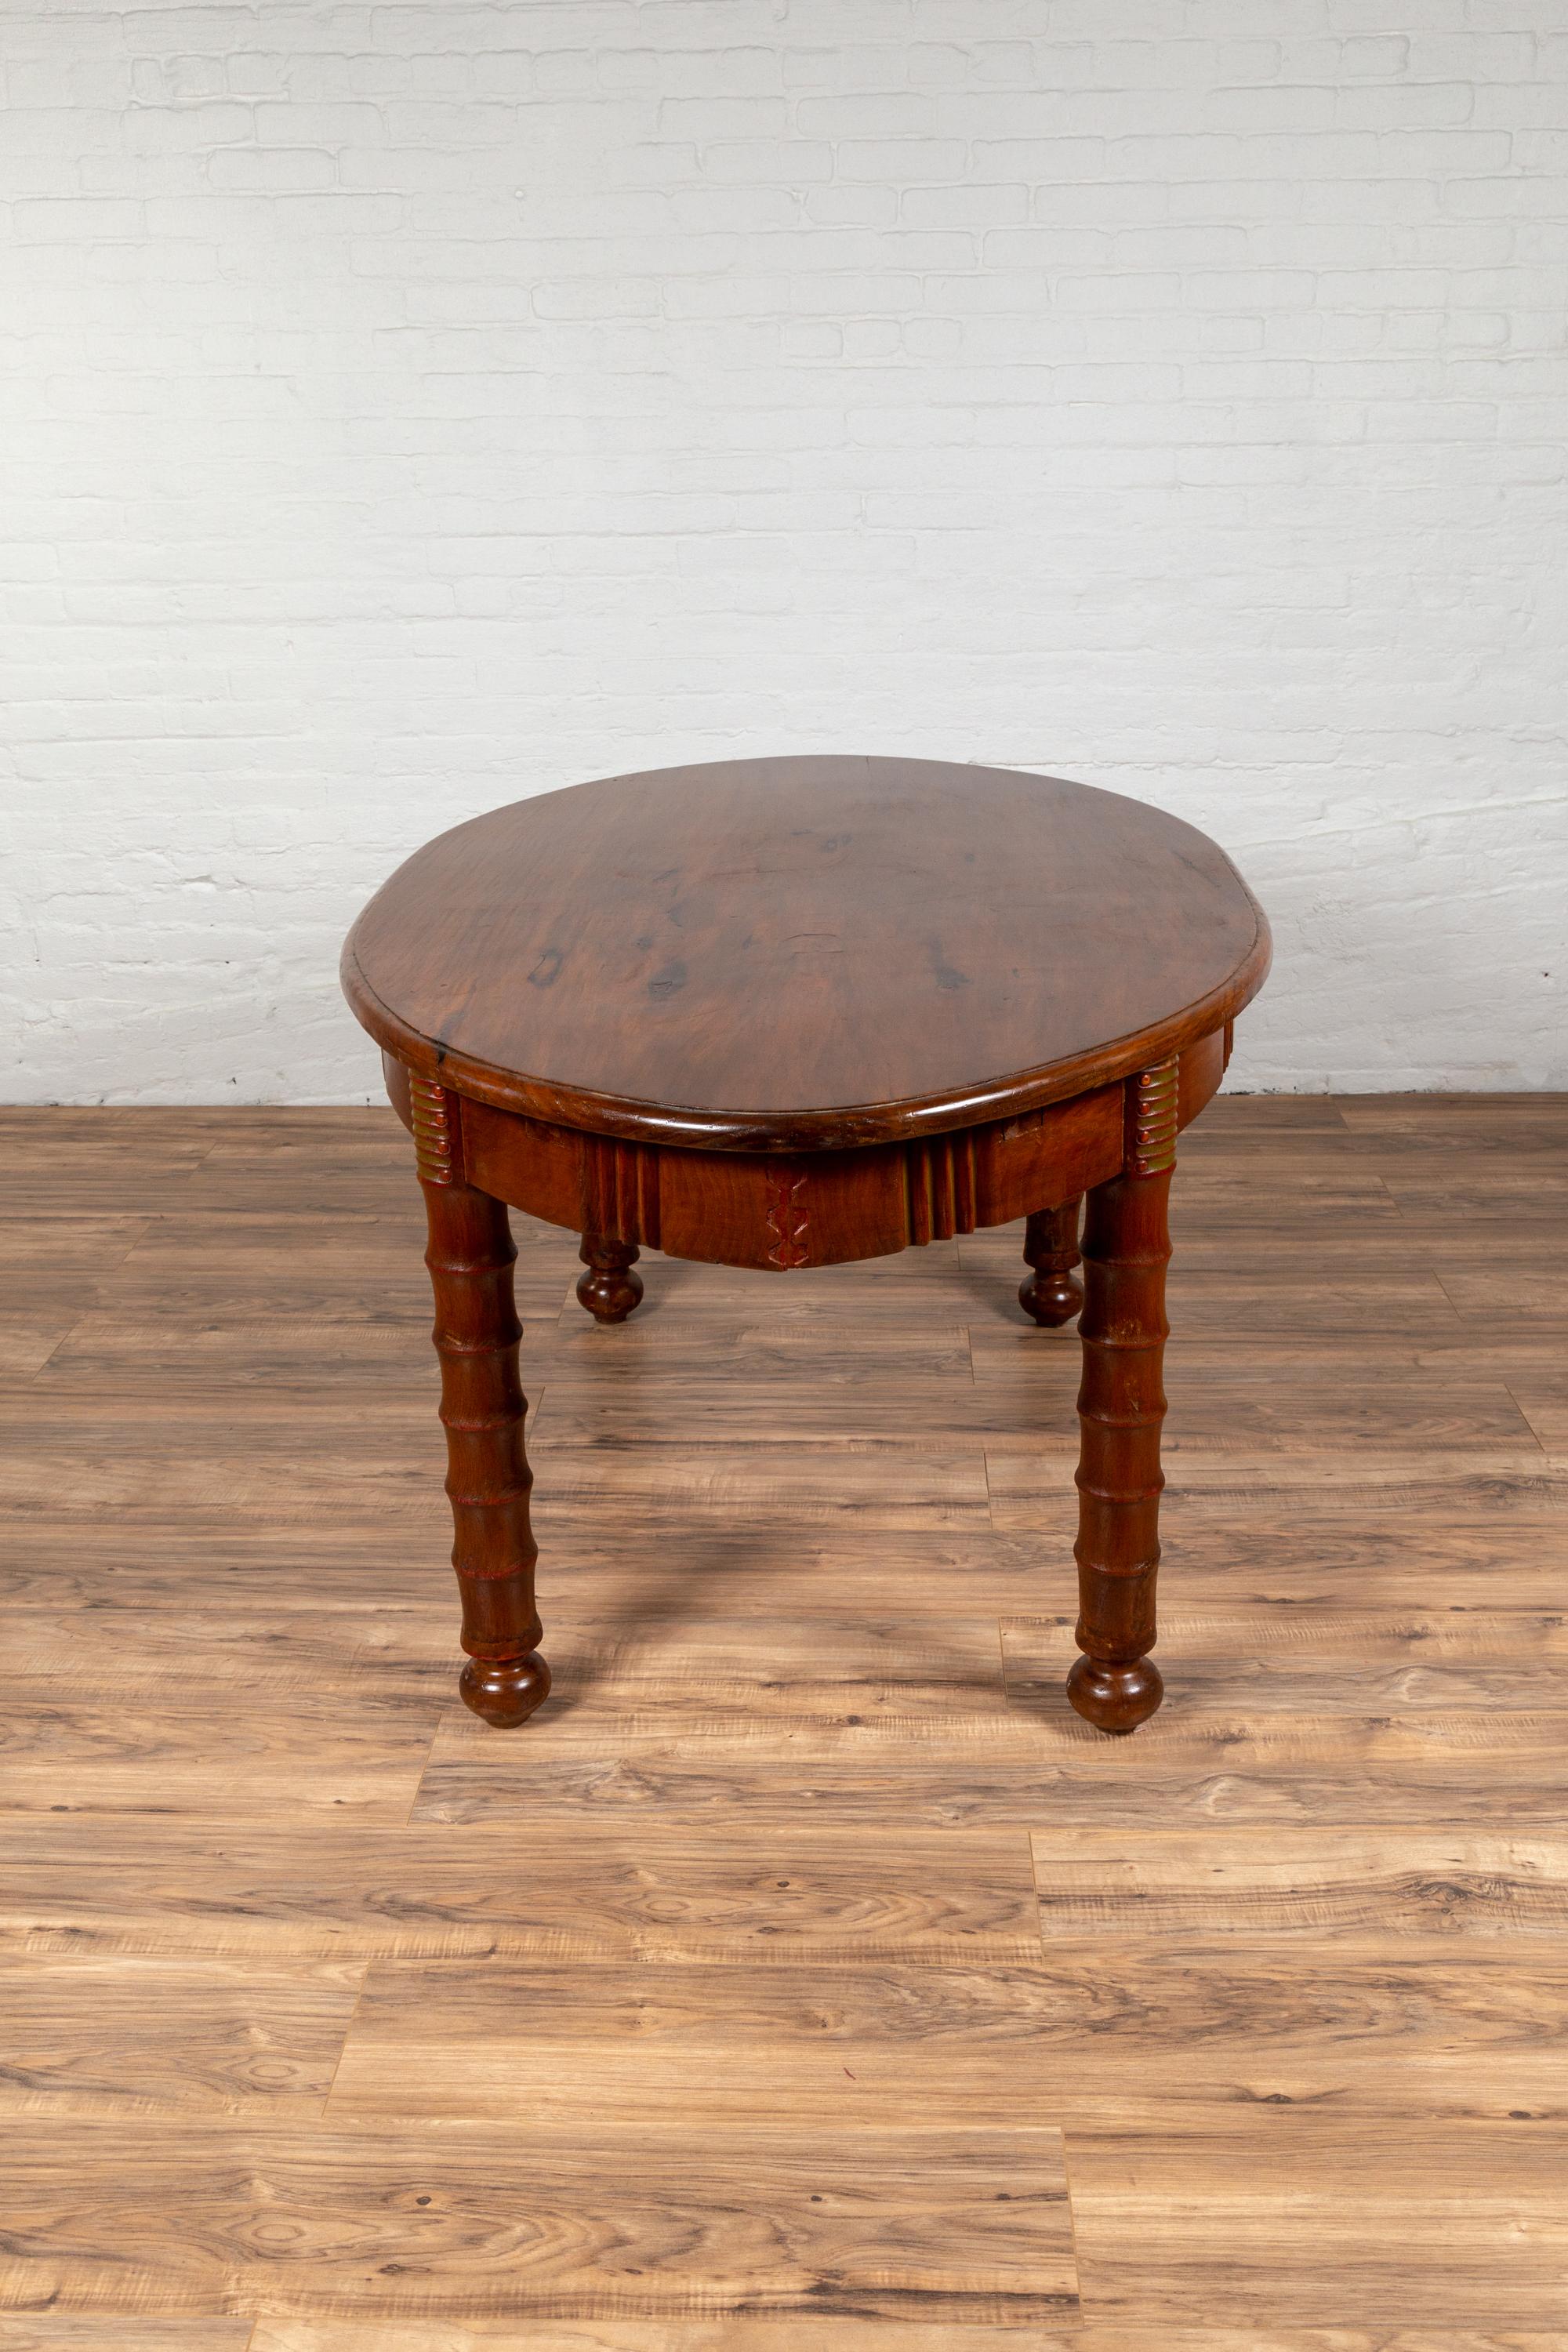 Antique Oval Dining Room Table from Indonesia with Spindle Legs and Warm Patina For Sale 5